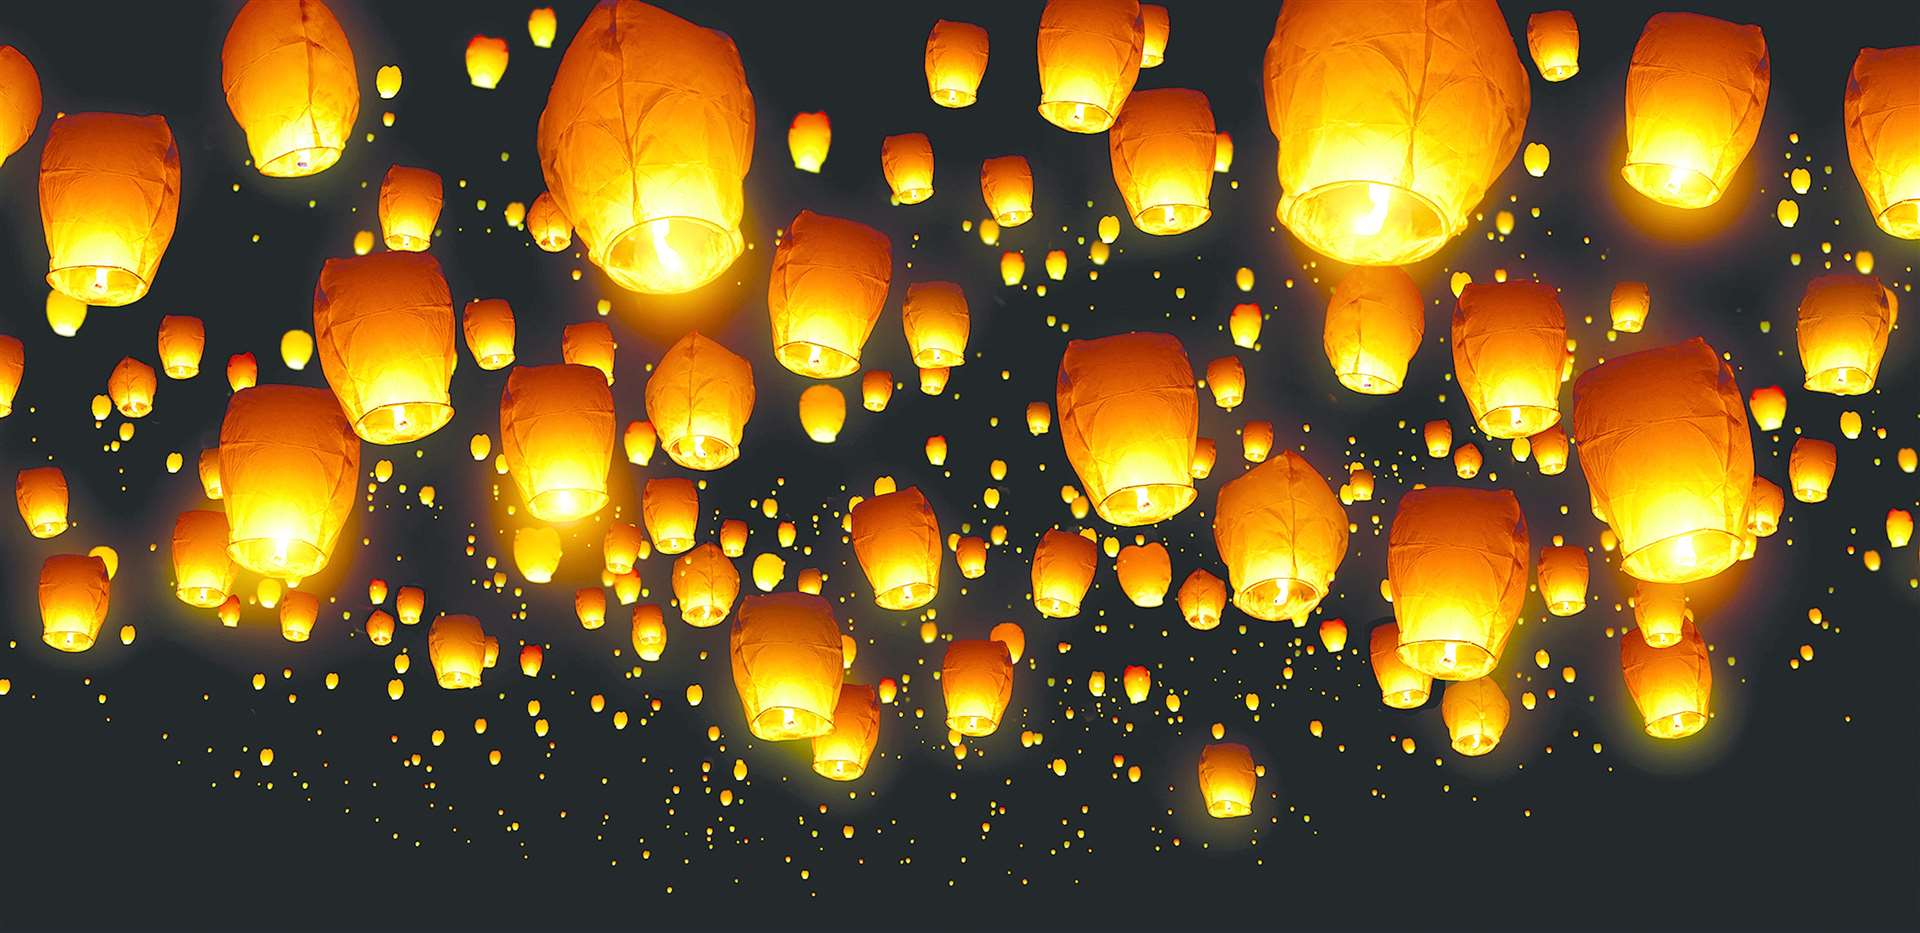 Lanterns and balloons are thought to harm wildlife and can be mistaken as distress signals